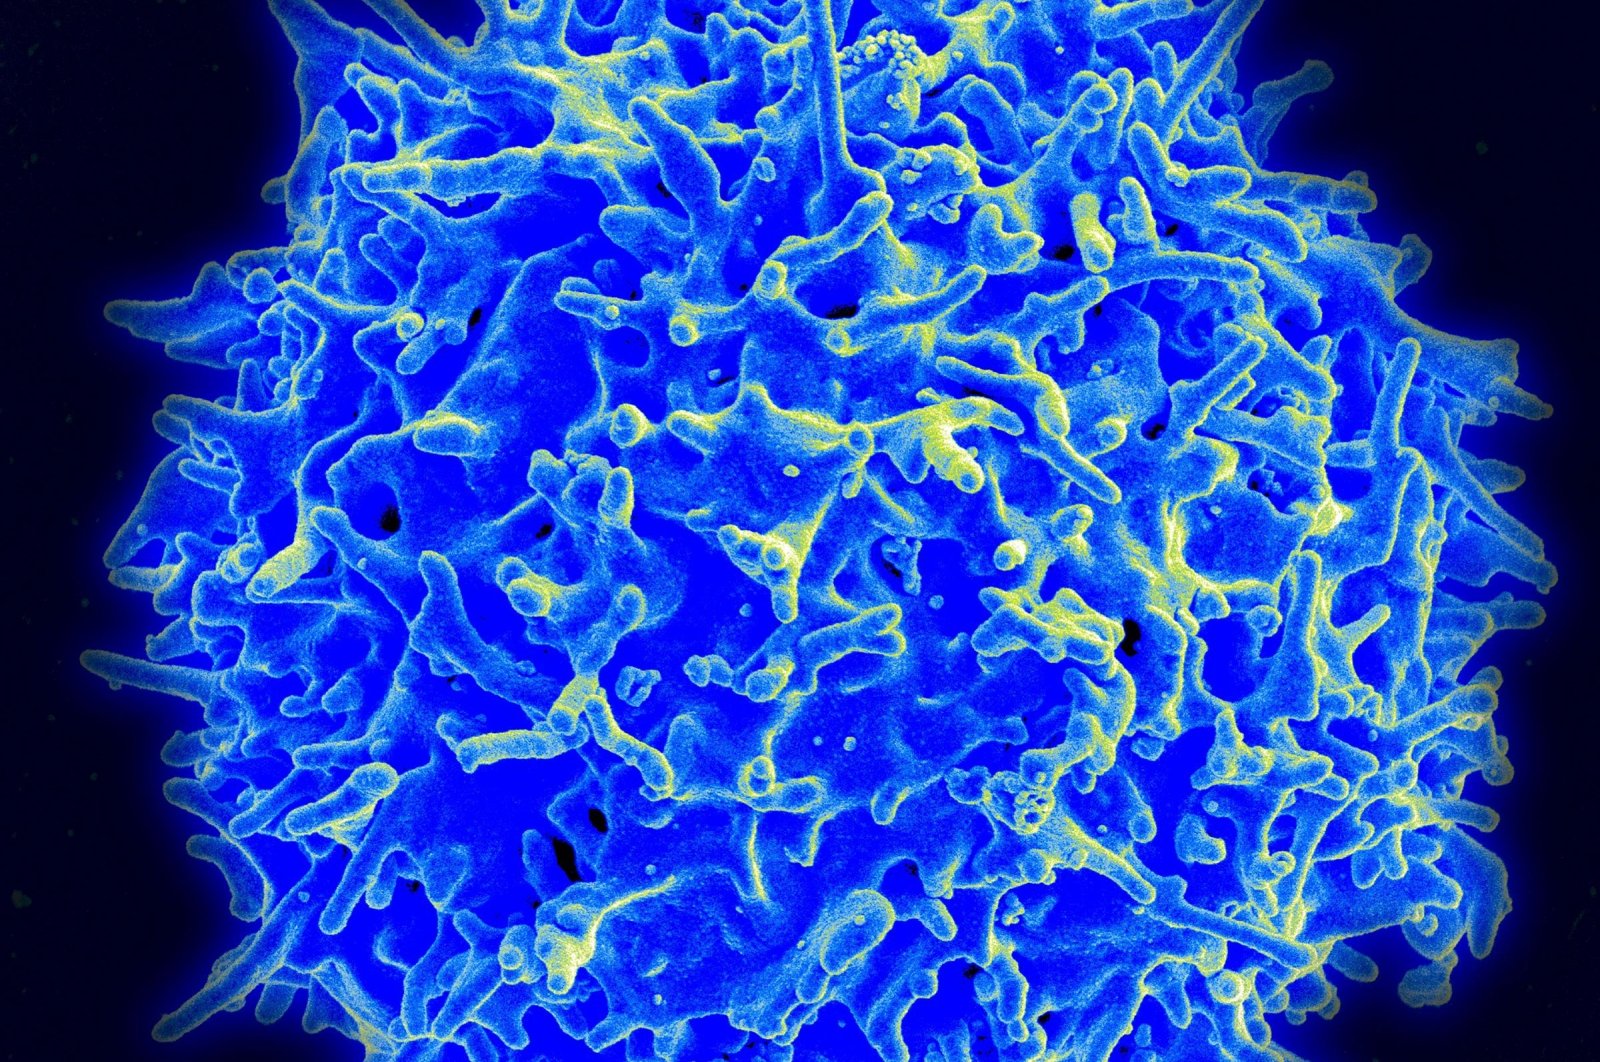 A scanning electron micrograph of a human T lymphocyte (also called a T cell) from the immune system of a healthy donor, in this National Institute of Allergy and Infectious Disease (NIAID) handout photo obtained March 30, 2021. (Photo by Handout / National Institute of Allergy and Infectious Diseases / AFP) 